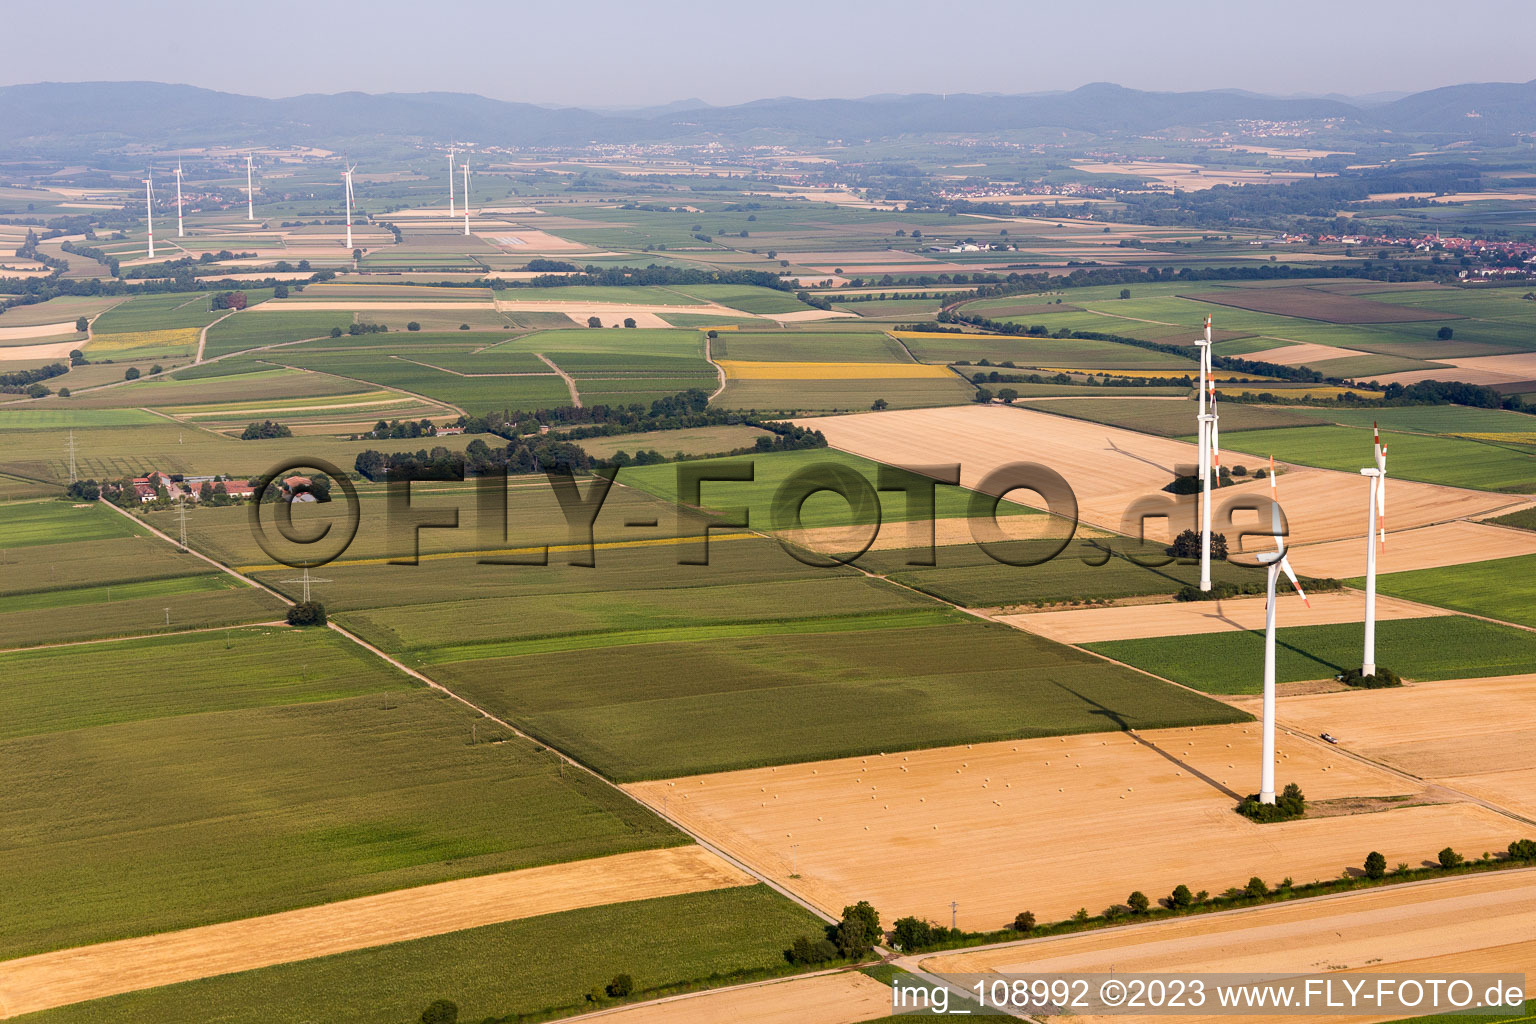 Oblique view of Wind turbines in Minfeld in the state Rhineland-Palatinate, Germany